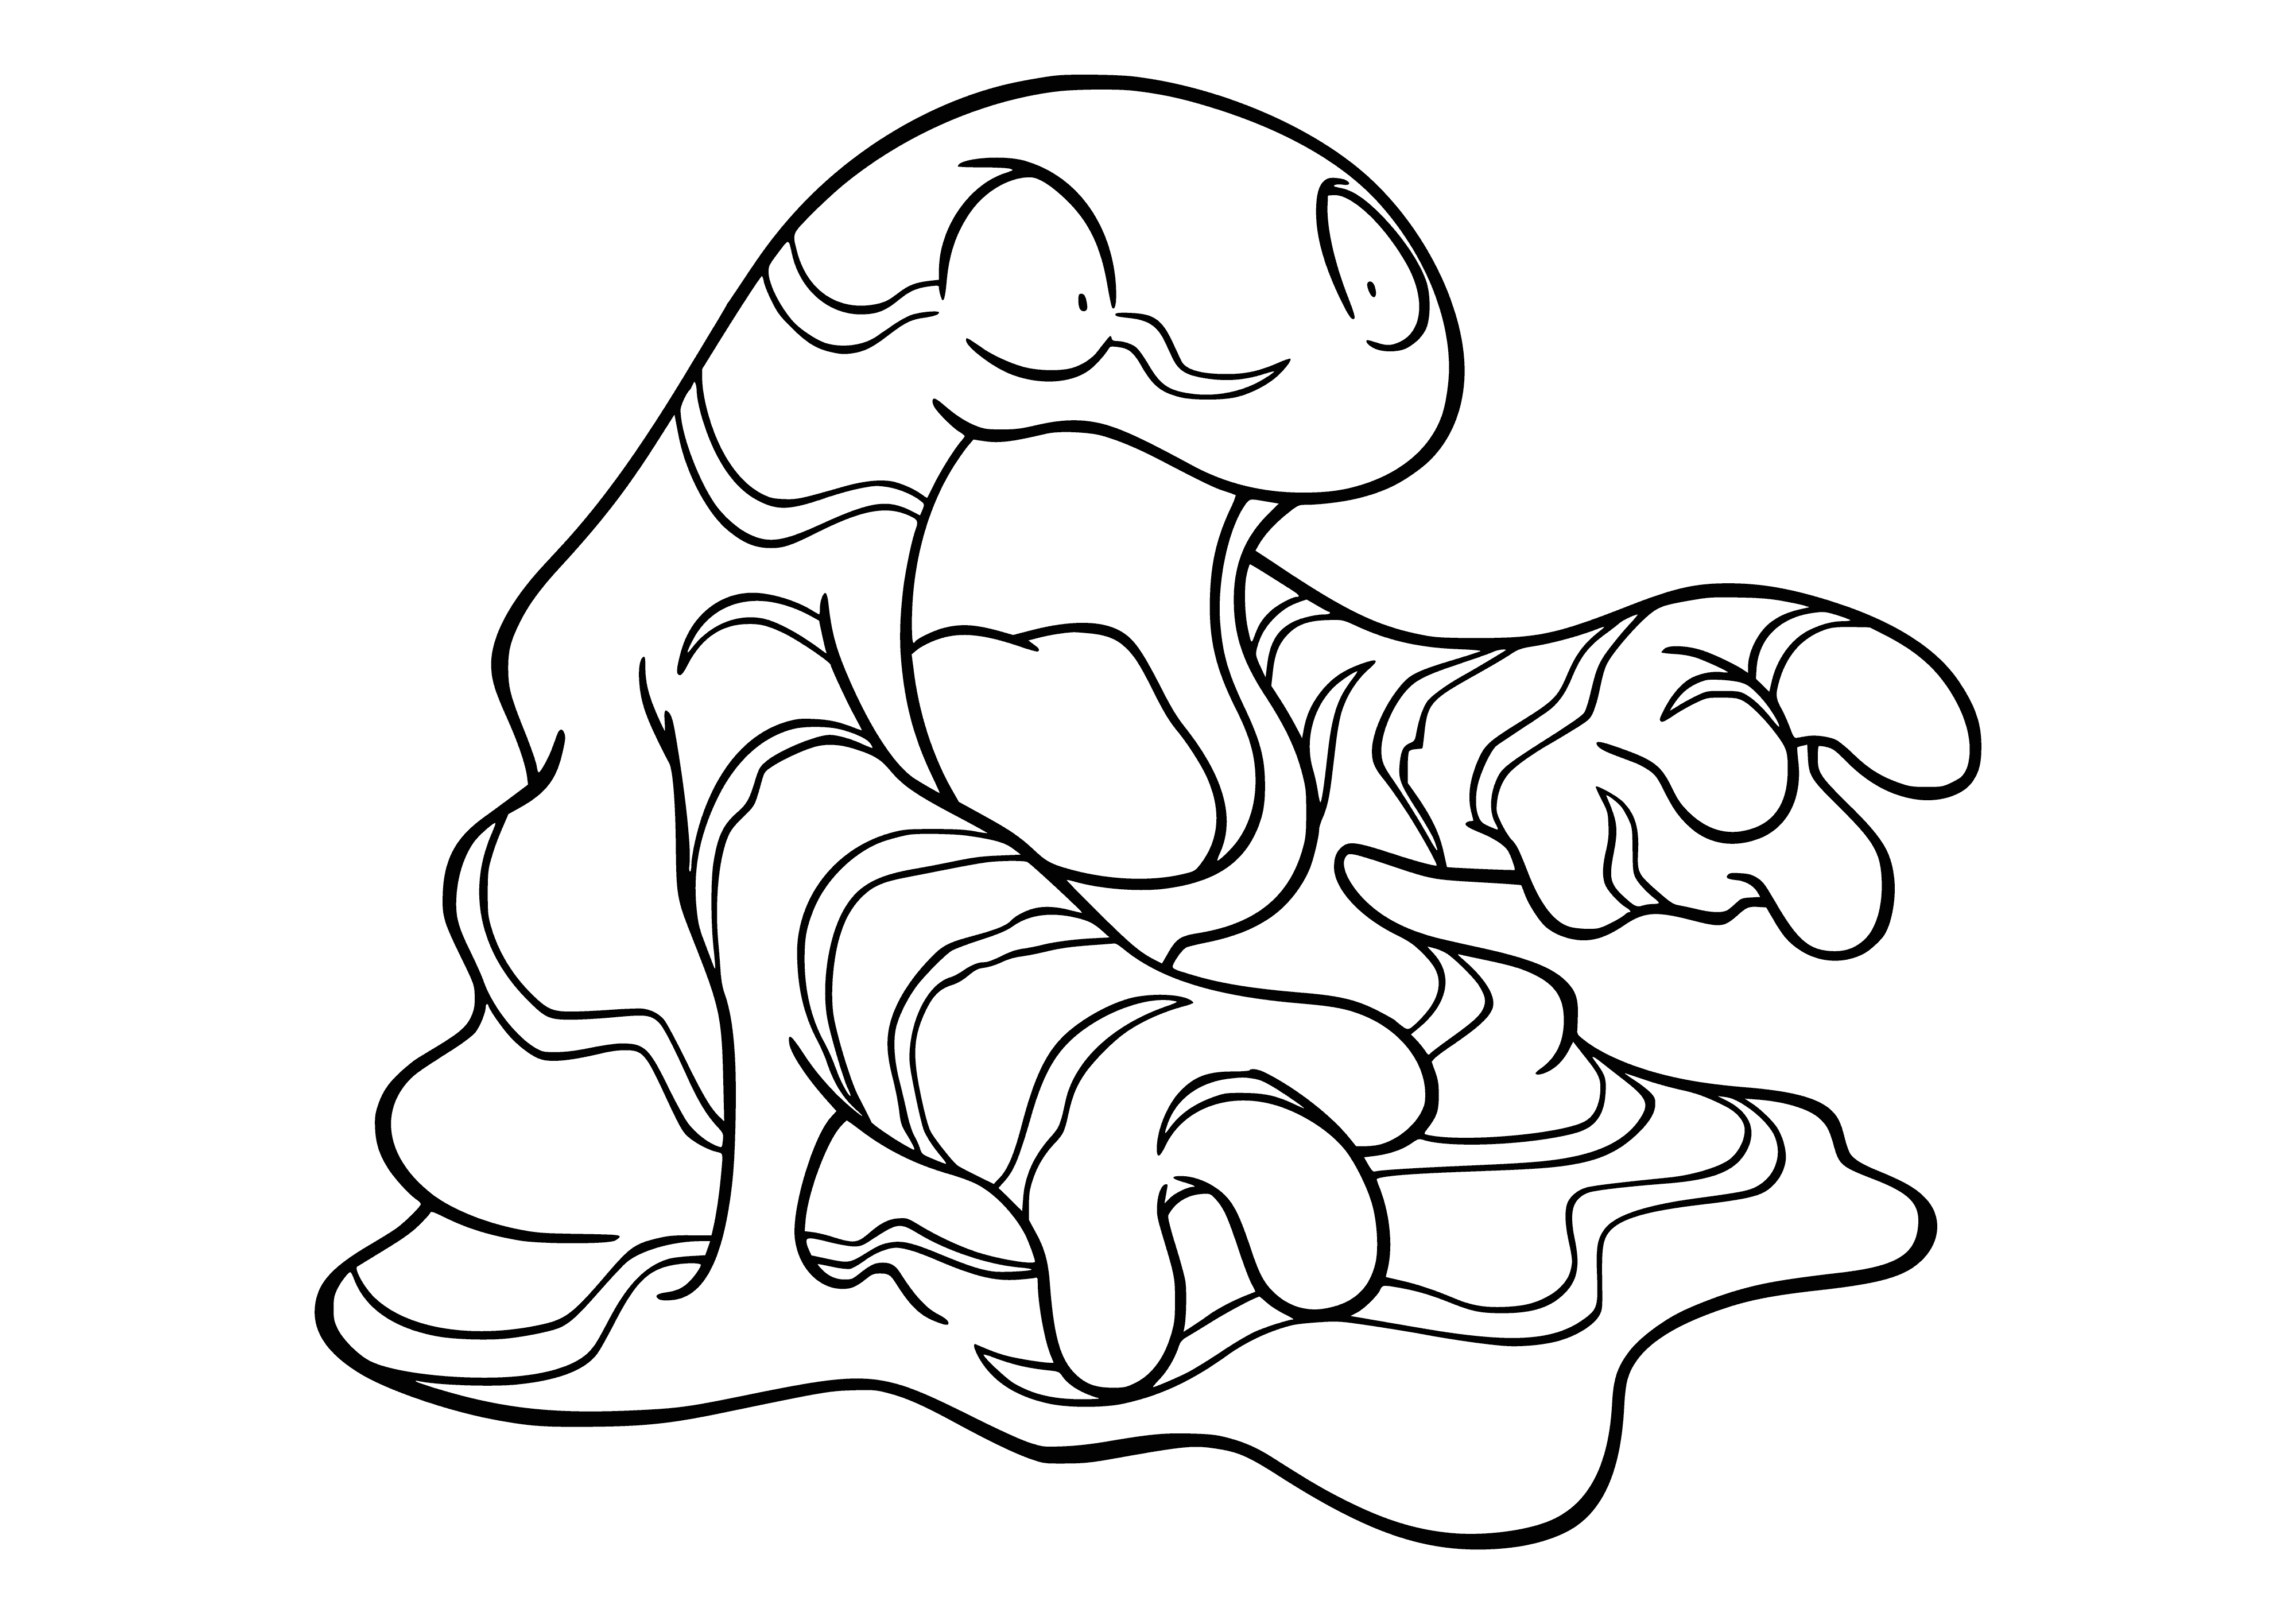 Pokemon Grimmer coloring page